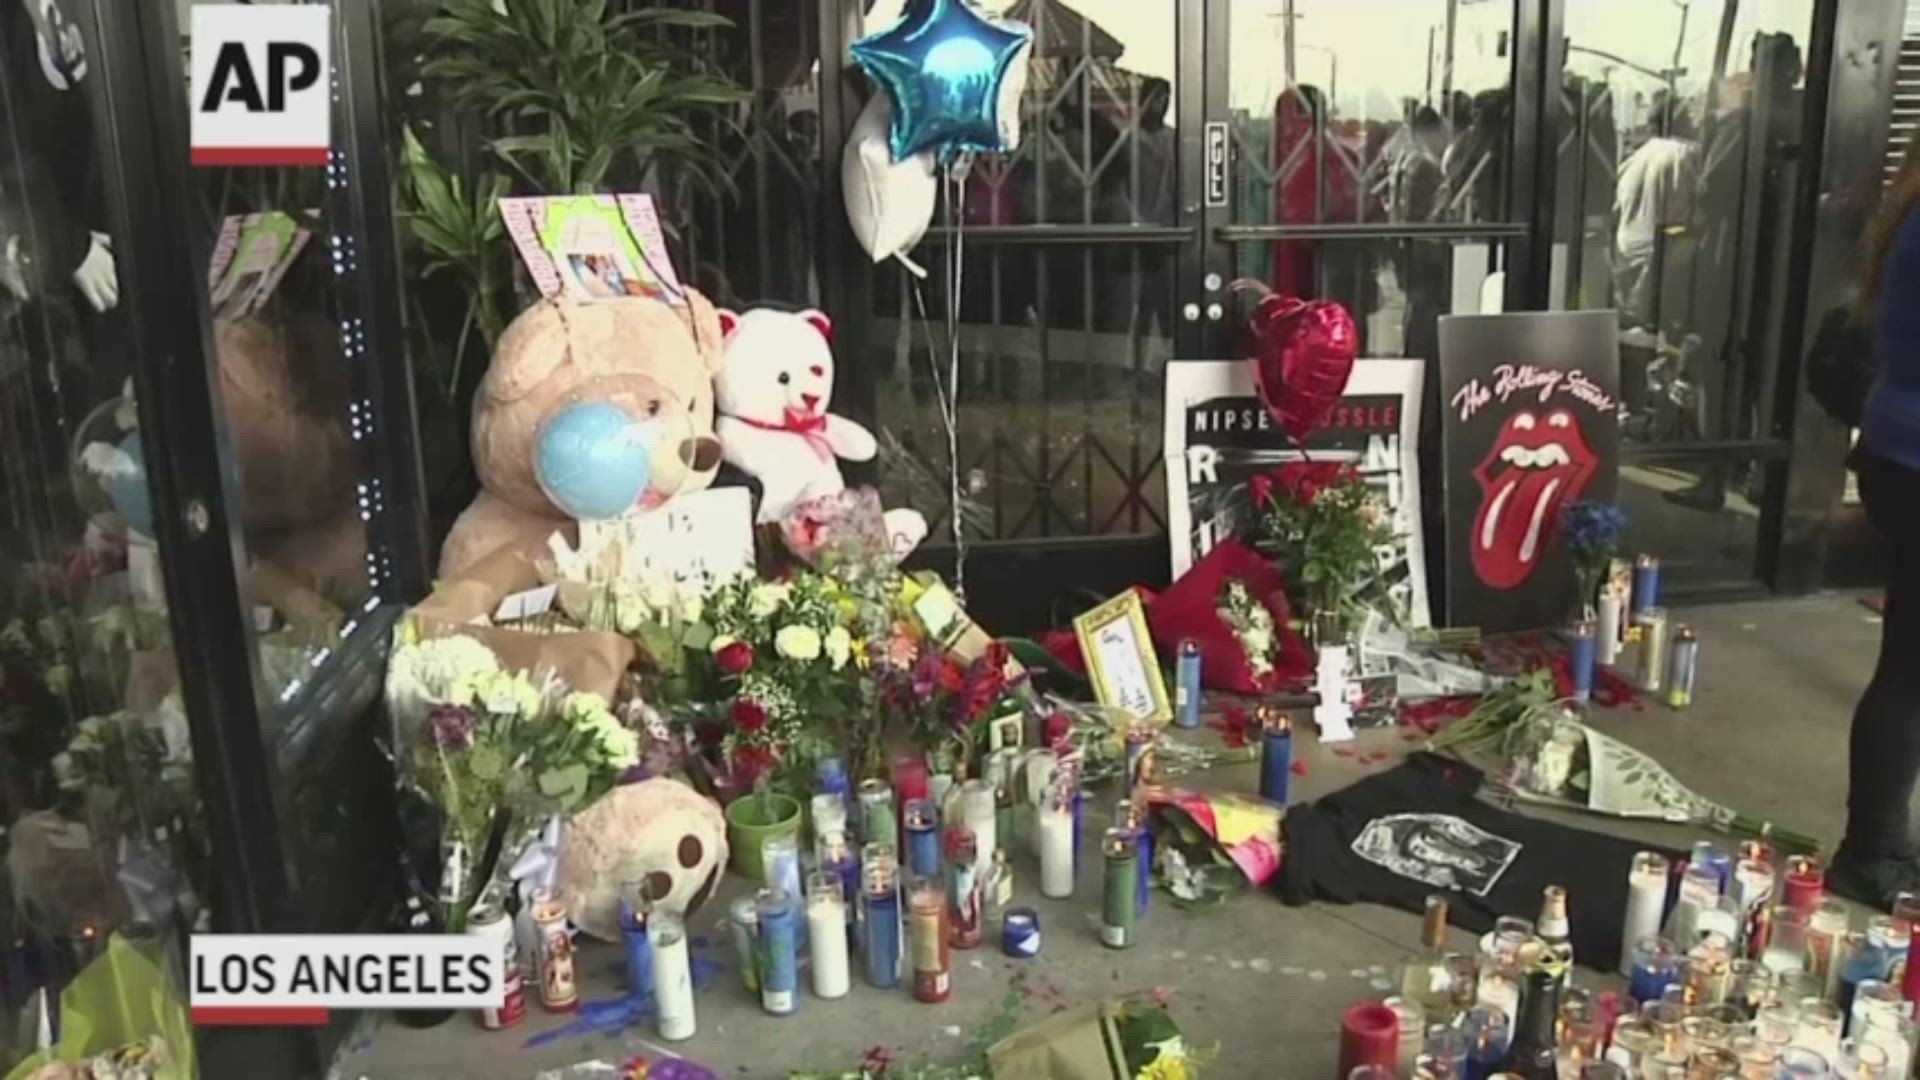 Rapper Nipsey Hussle, who was shot and killed Sunday night outside of his Los Angeles clothing store, is being remembered for giving back to his community.  (AP)